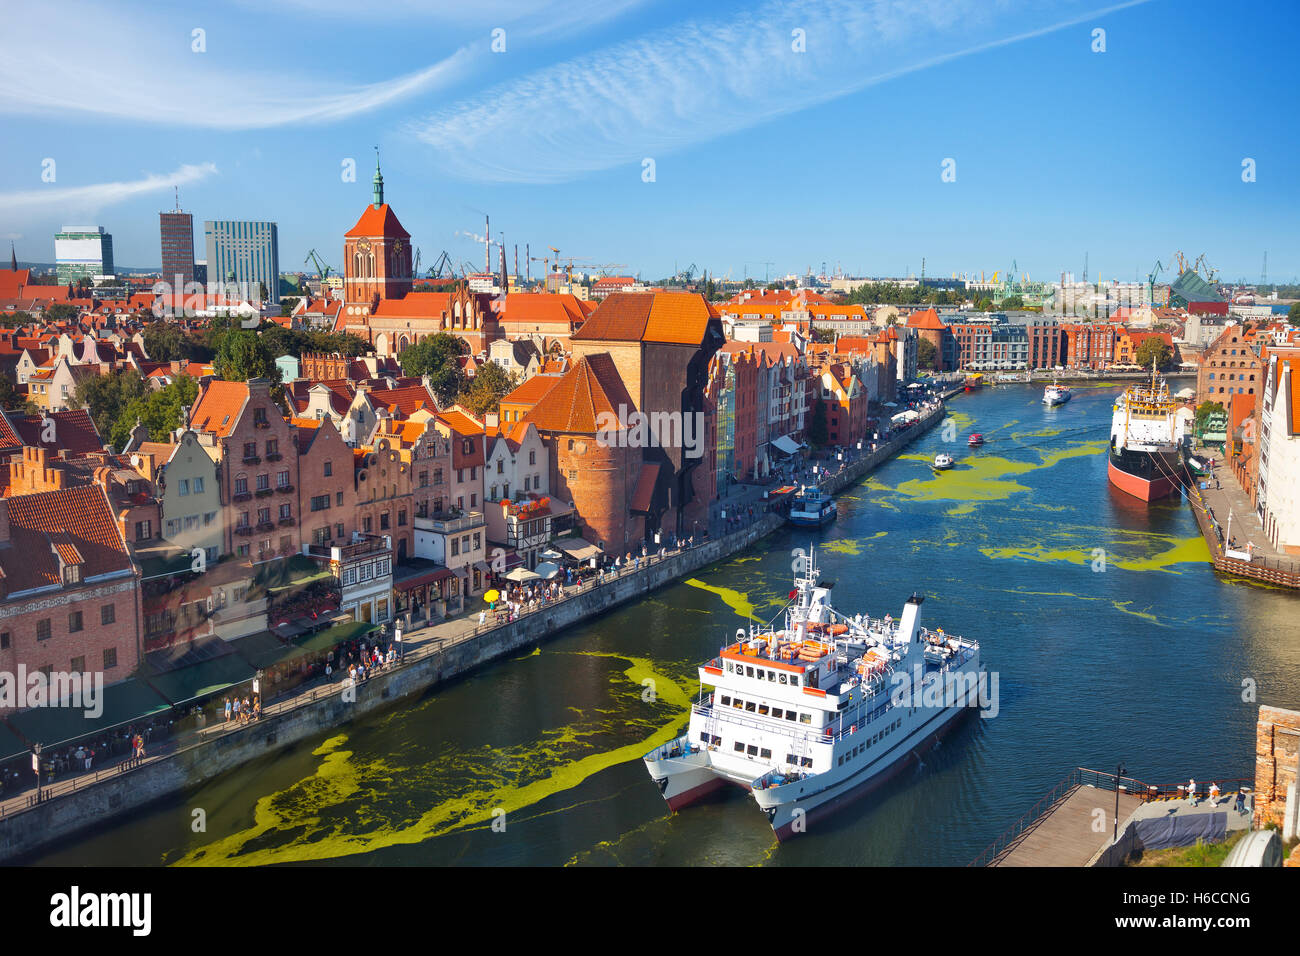 The view from above on Old Town in Gdansk, Poland. Stock Photo